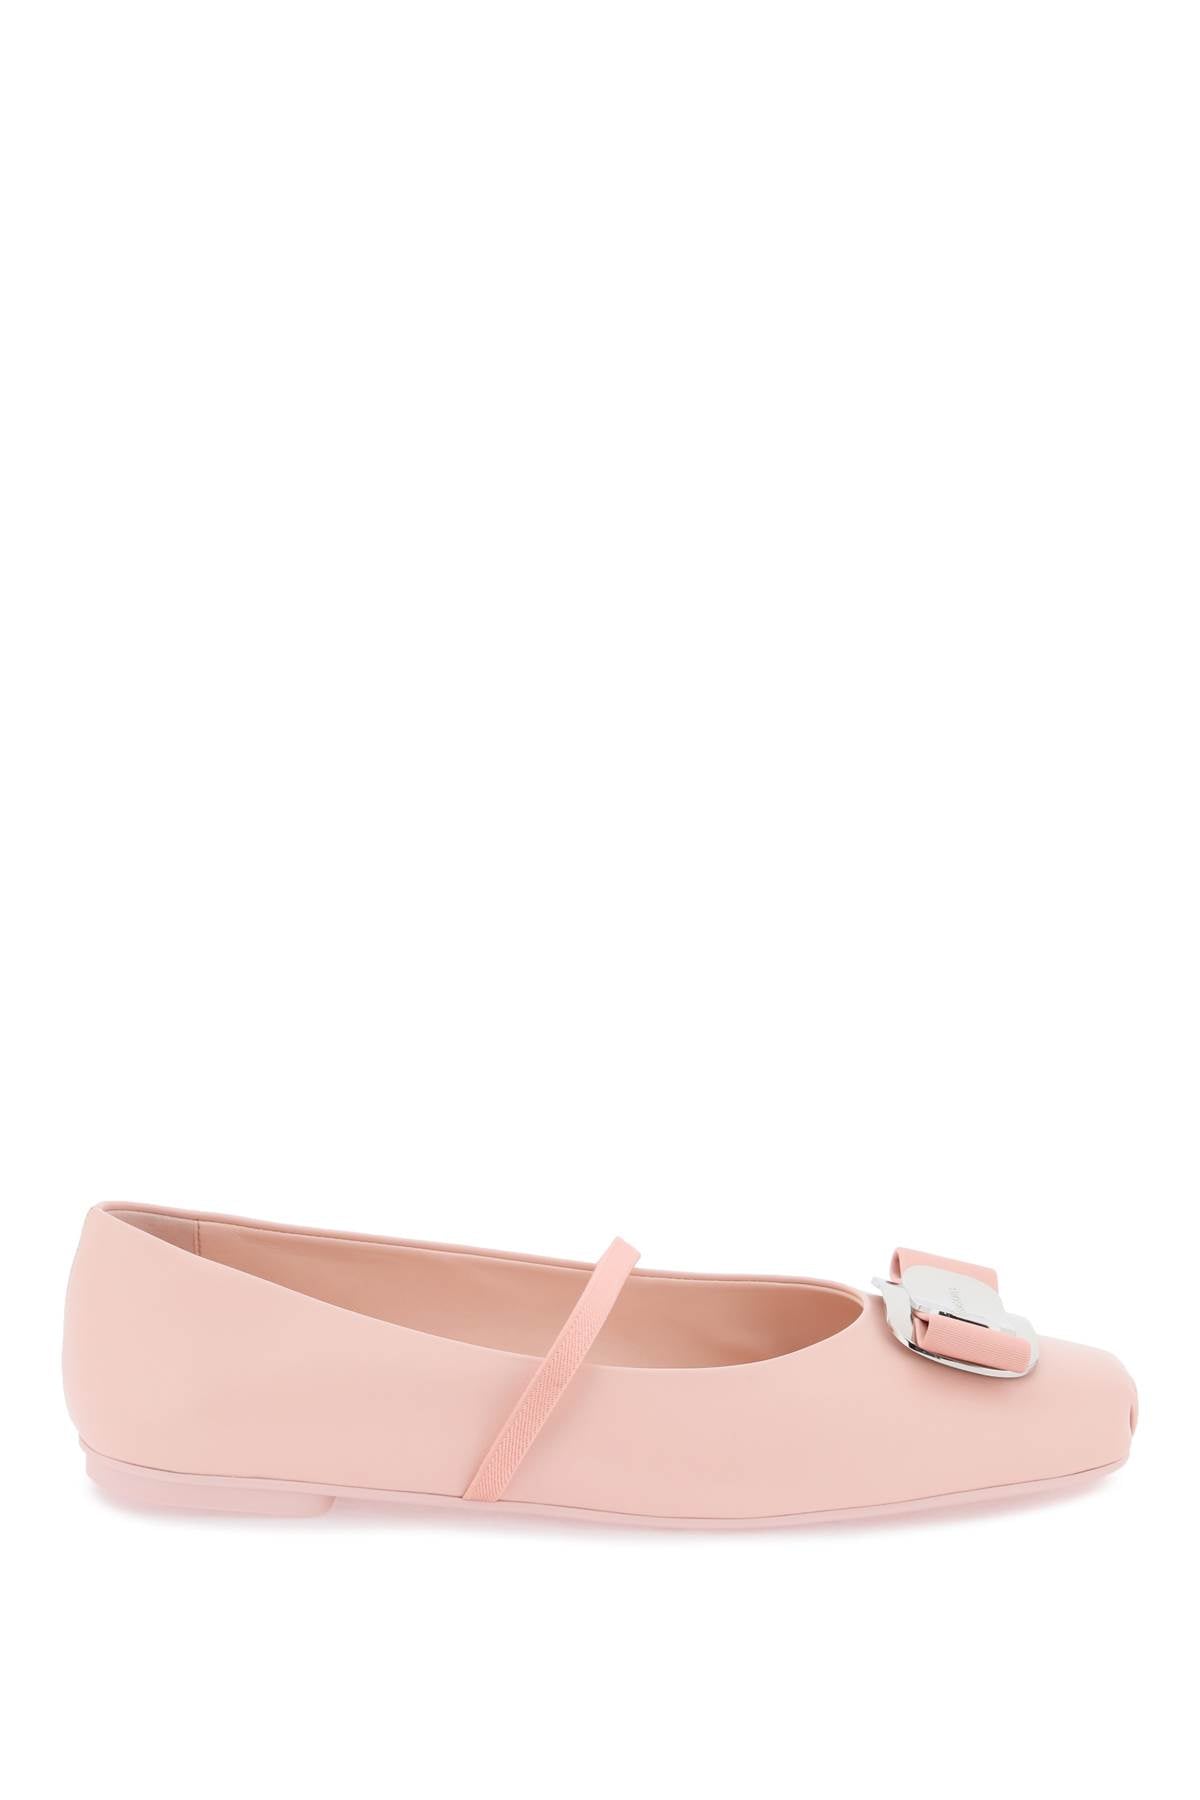 FERRAGAMO Pink Nappa Leather Pointe Inspired Ballet Flats with Geometric Vara Plate